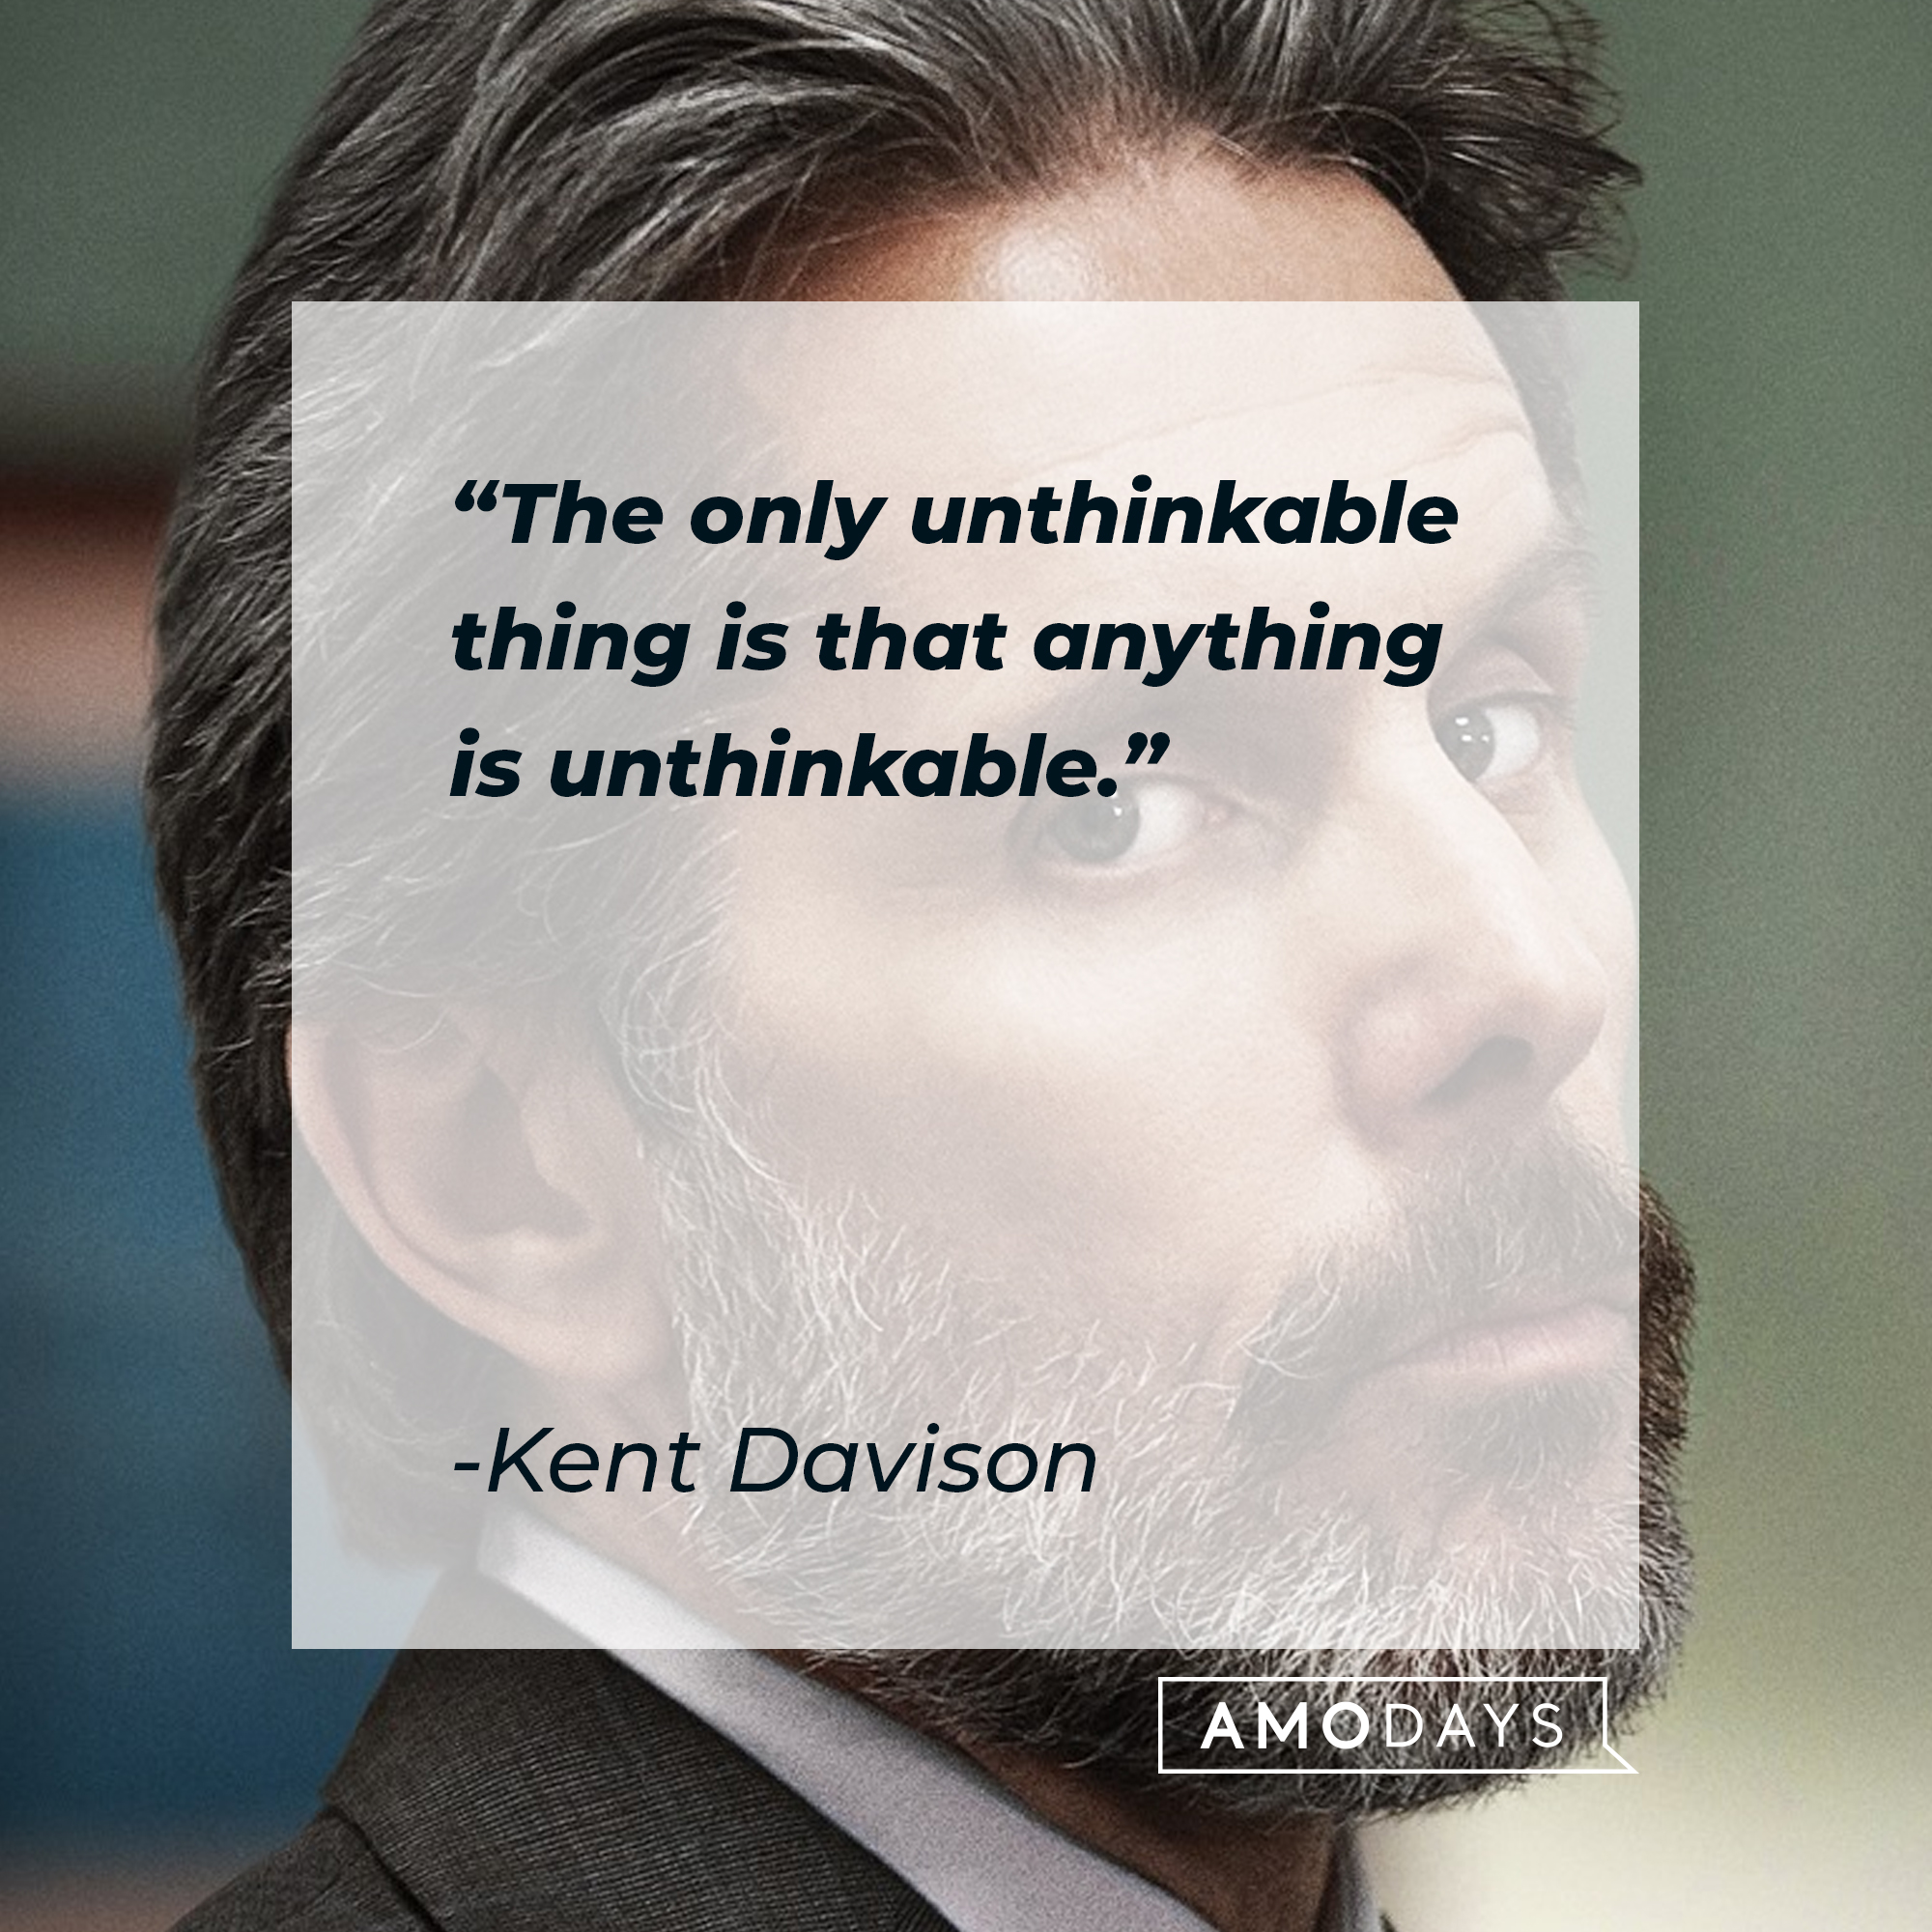 Kent Davison, with his  quote: ‘The only unthinkable thing is that anything is unthinkable.” | Source: Facebook.com/veep